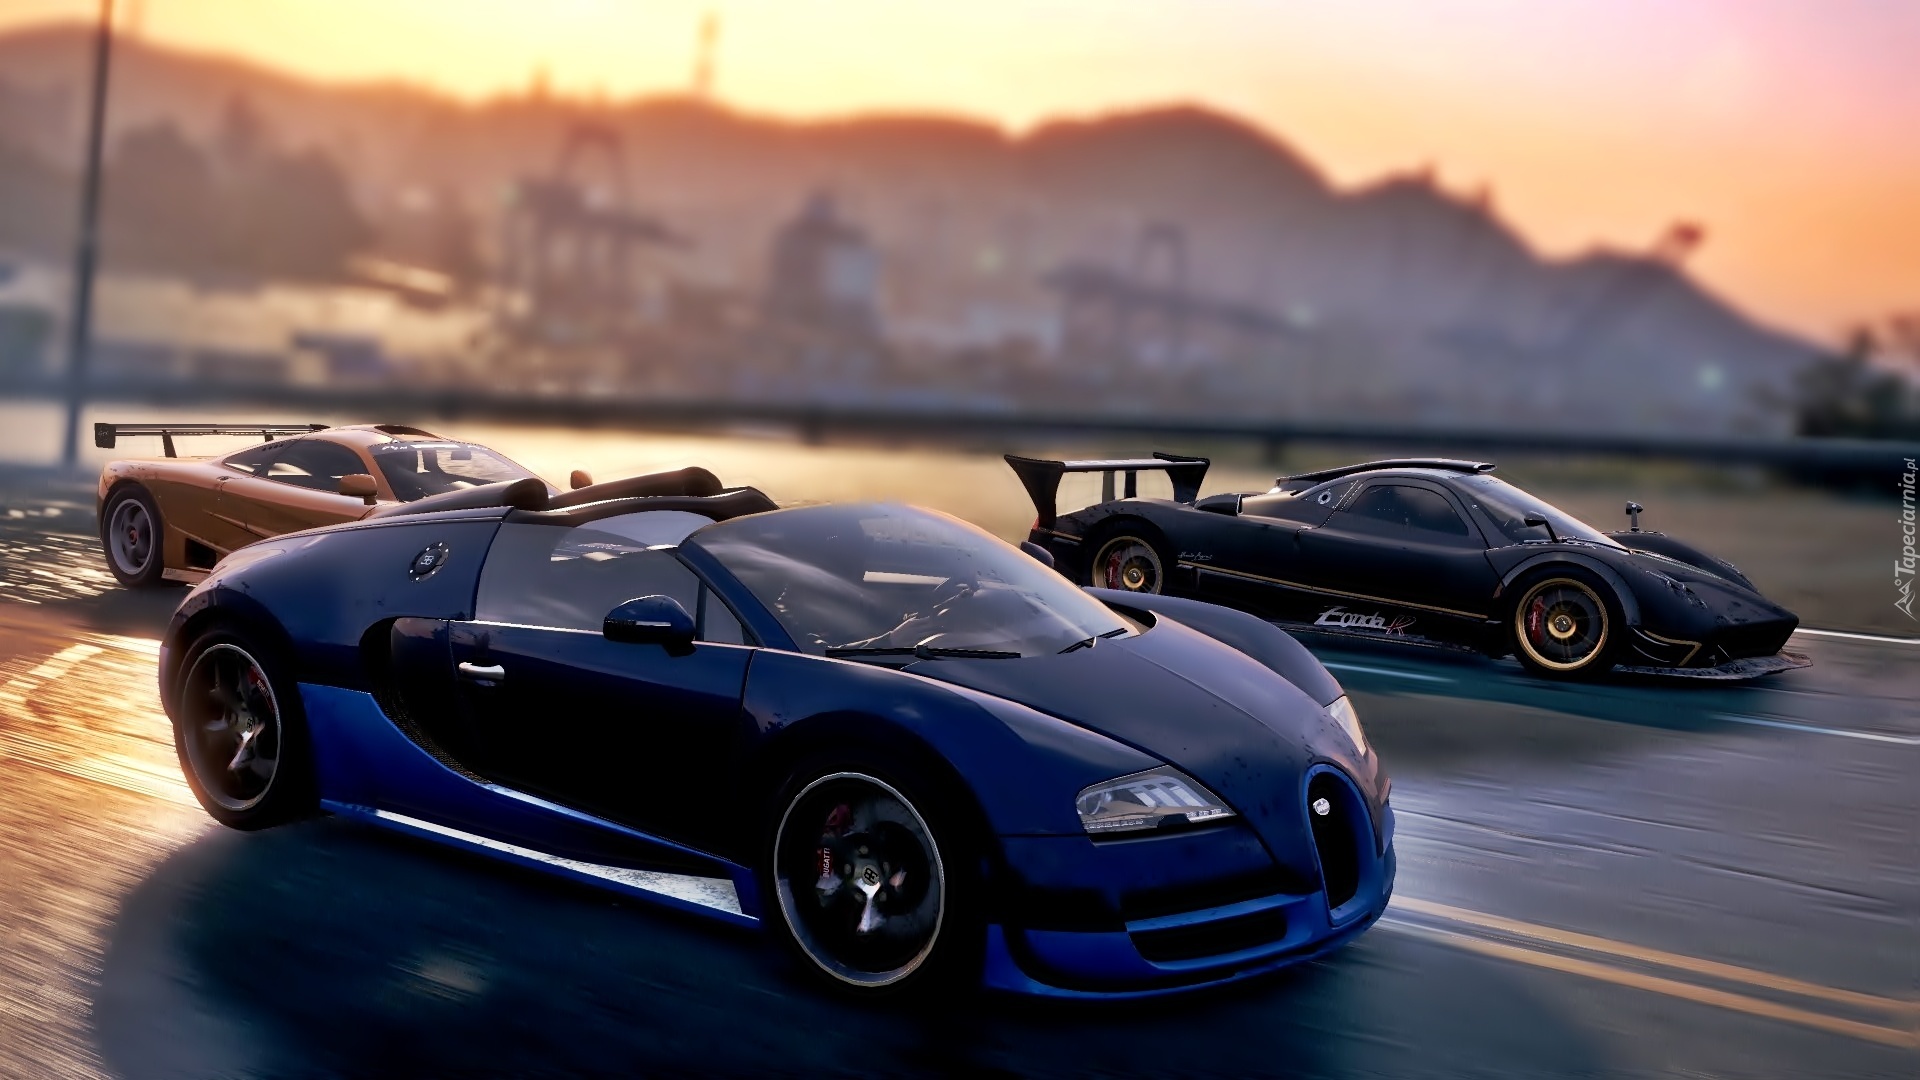 Nfs mw 2. Бугатти Вейрон в most wanted 2012. Макларен NFS most wanted 2012. Bugatti Veyron Vitesse most wanted 2012. Need for Speed most wanted Бугатти.